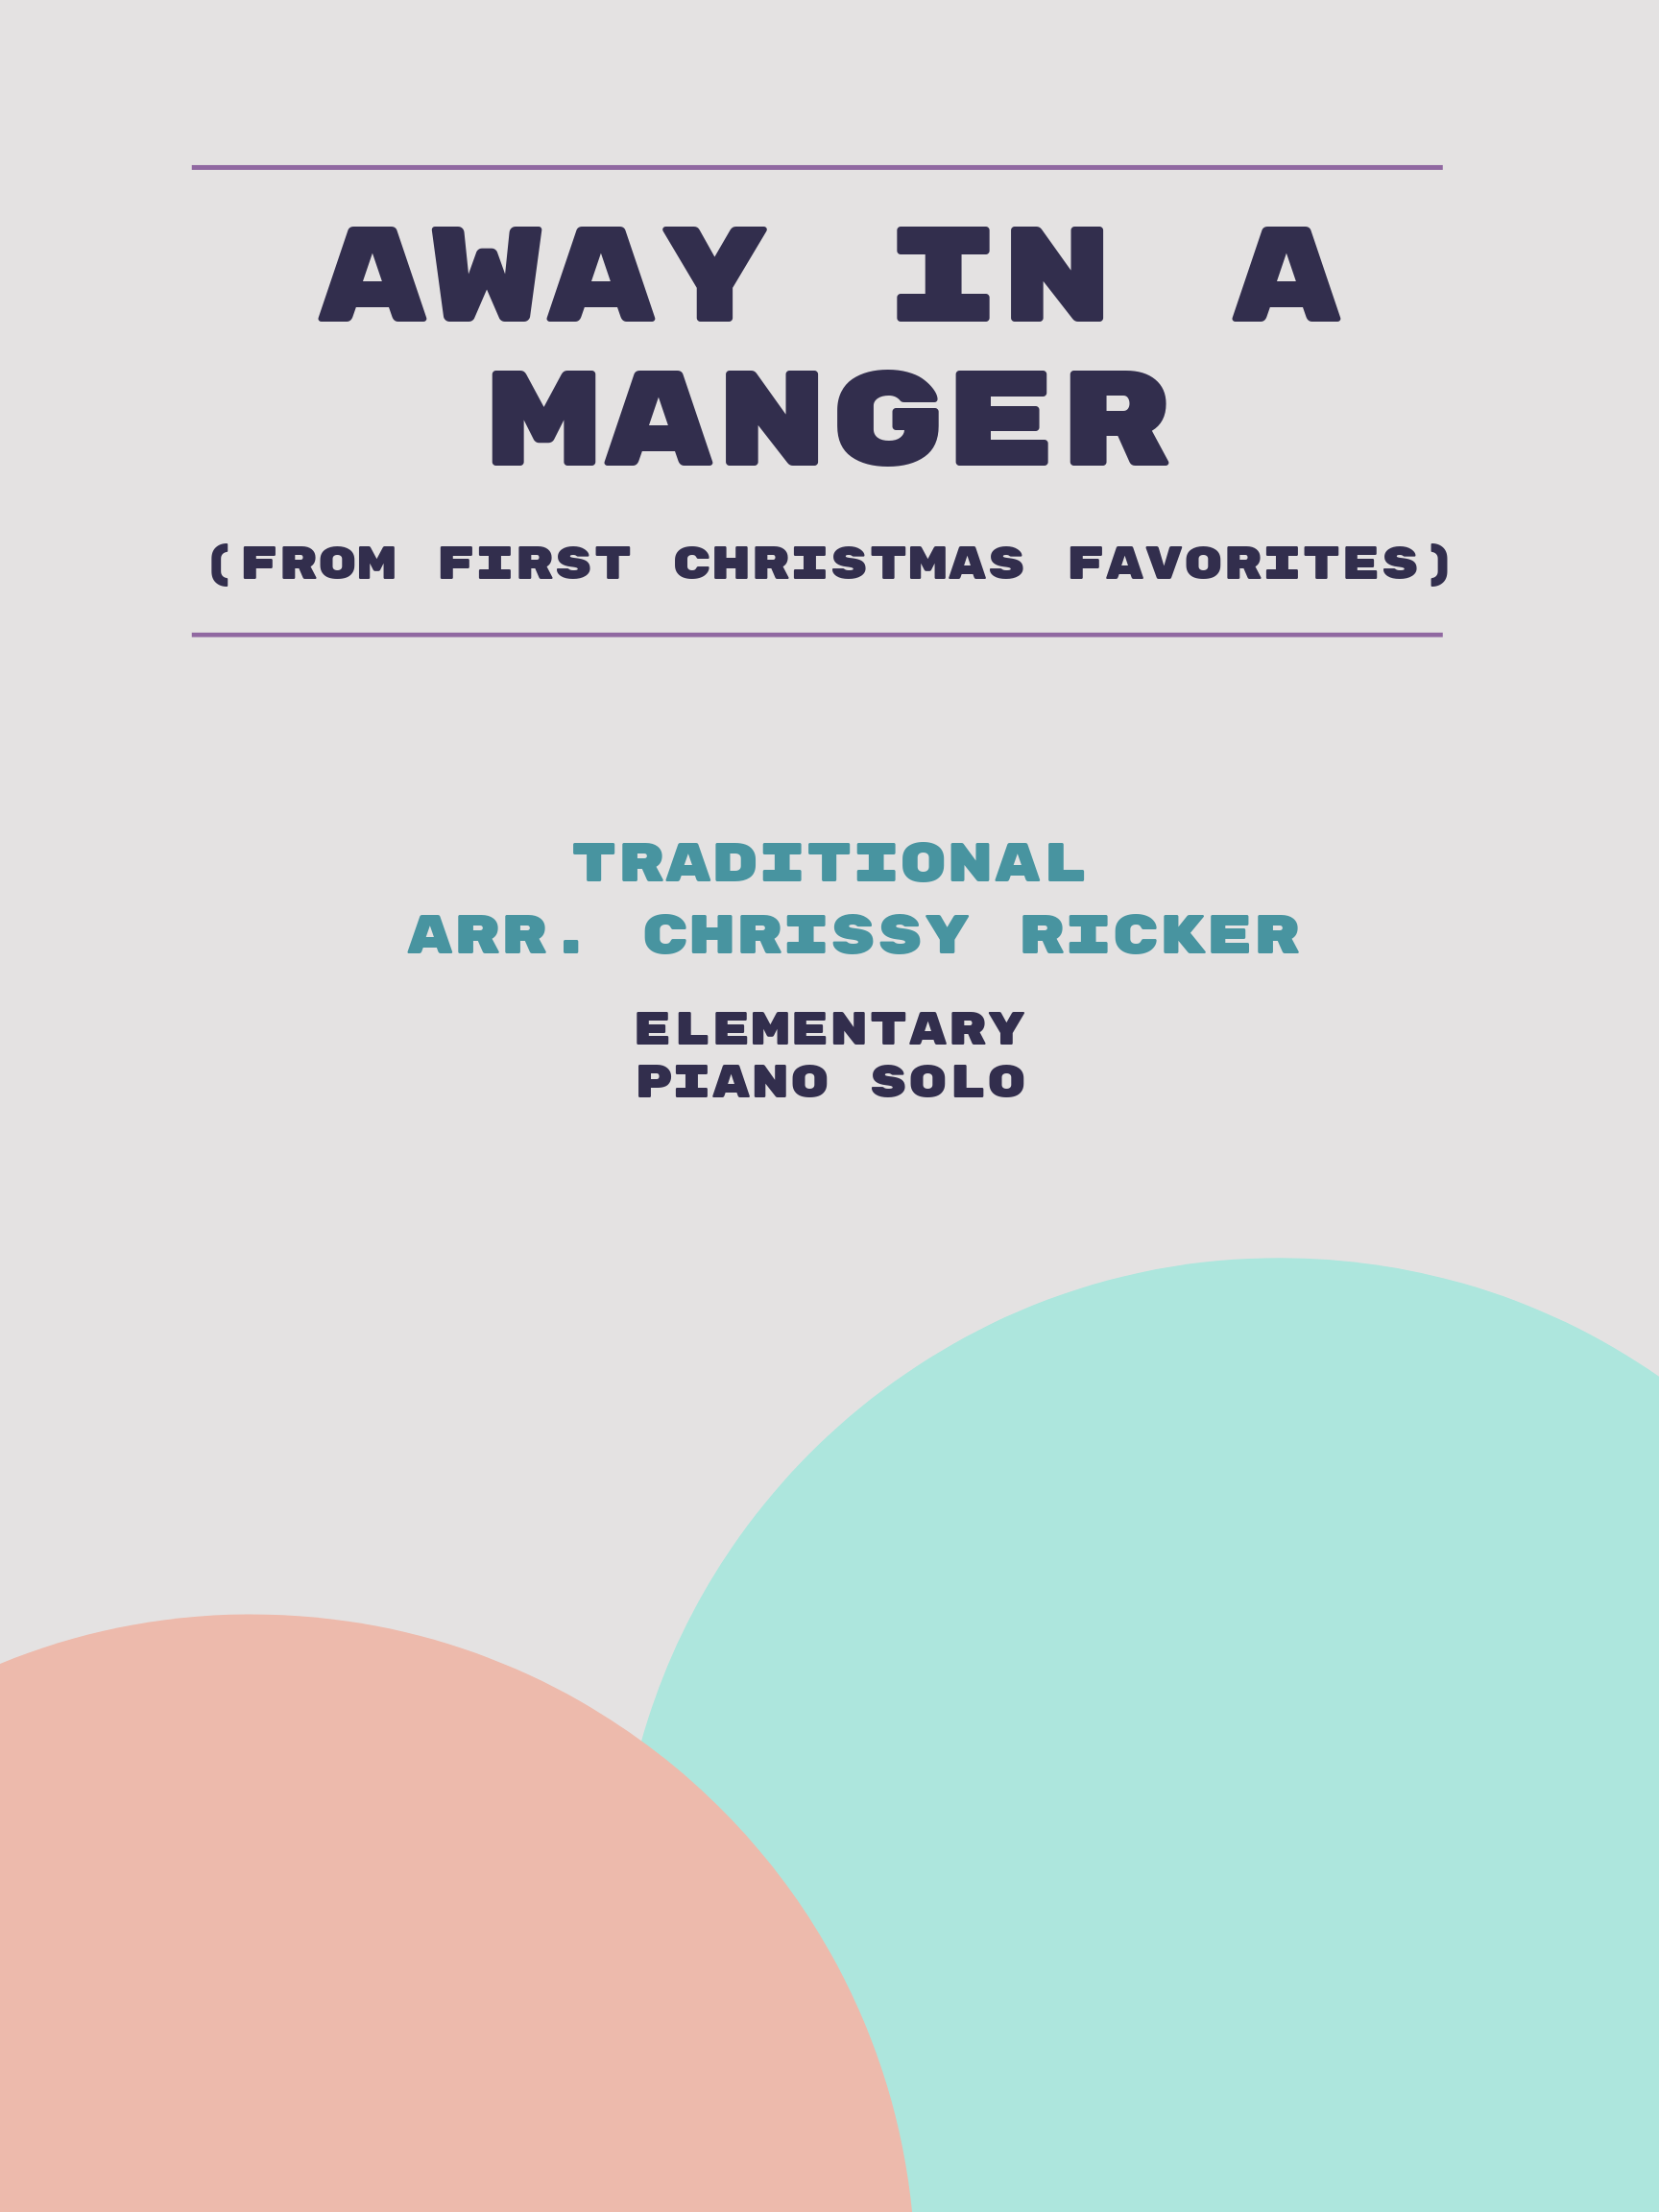 Away in a Manger by Traditional